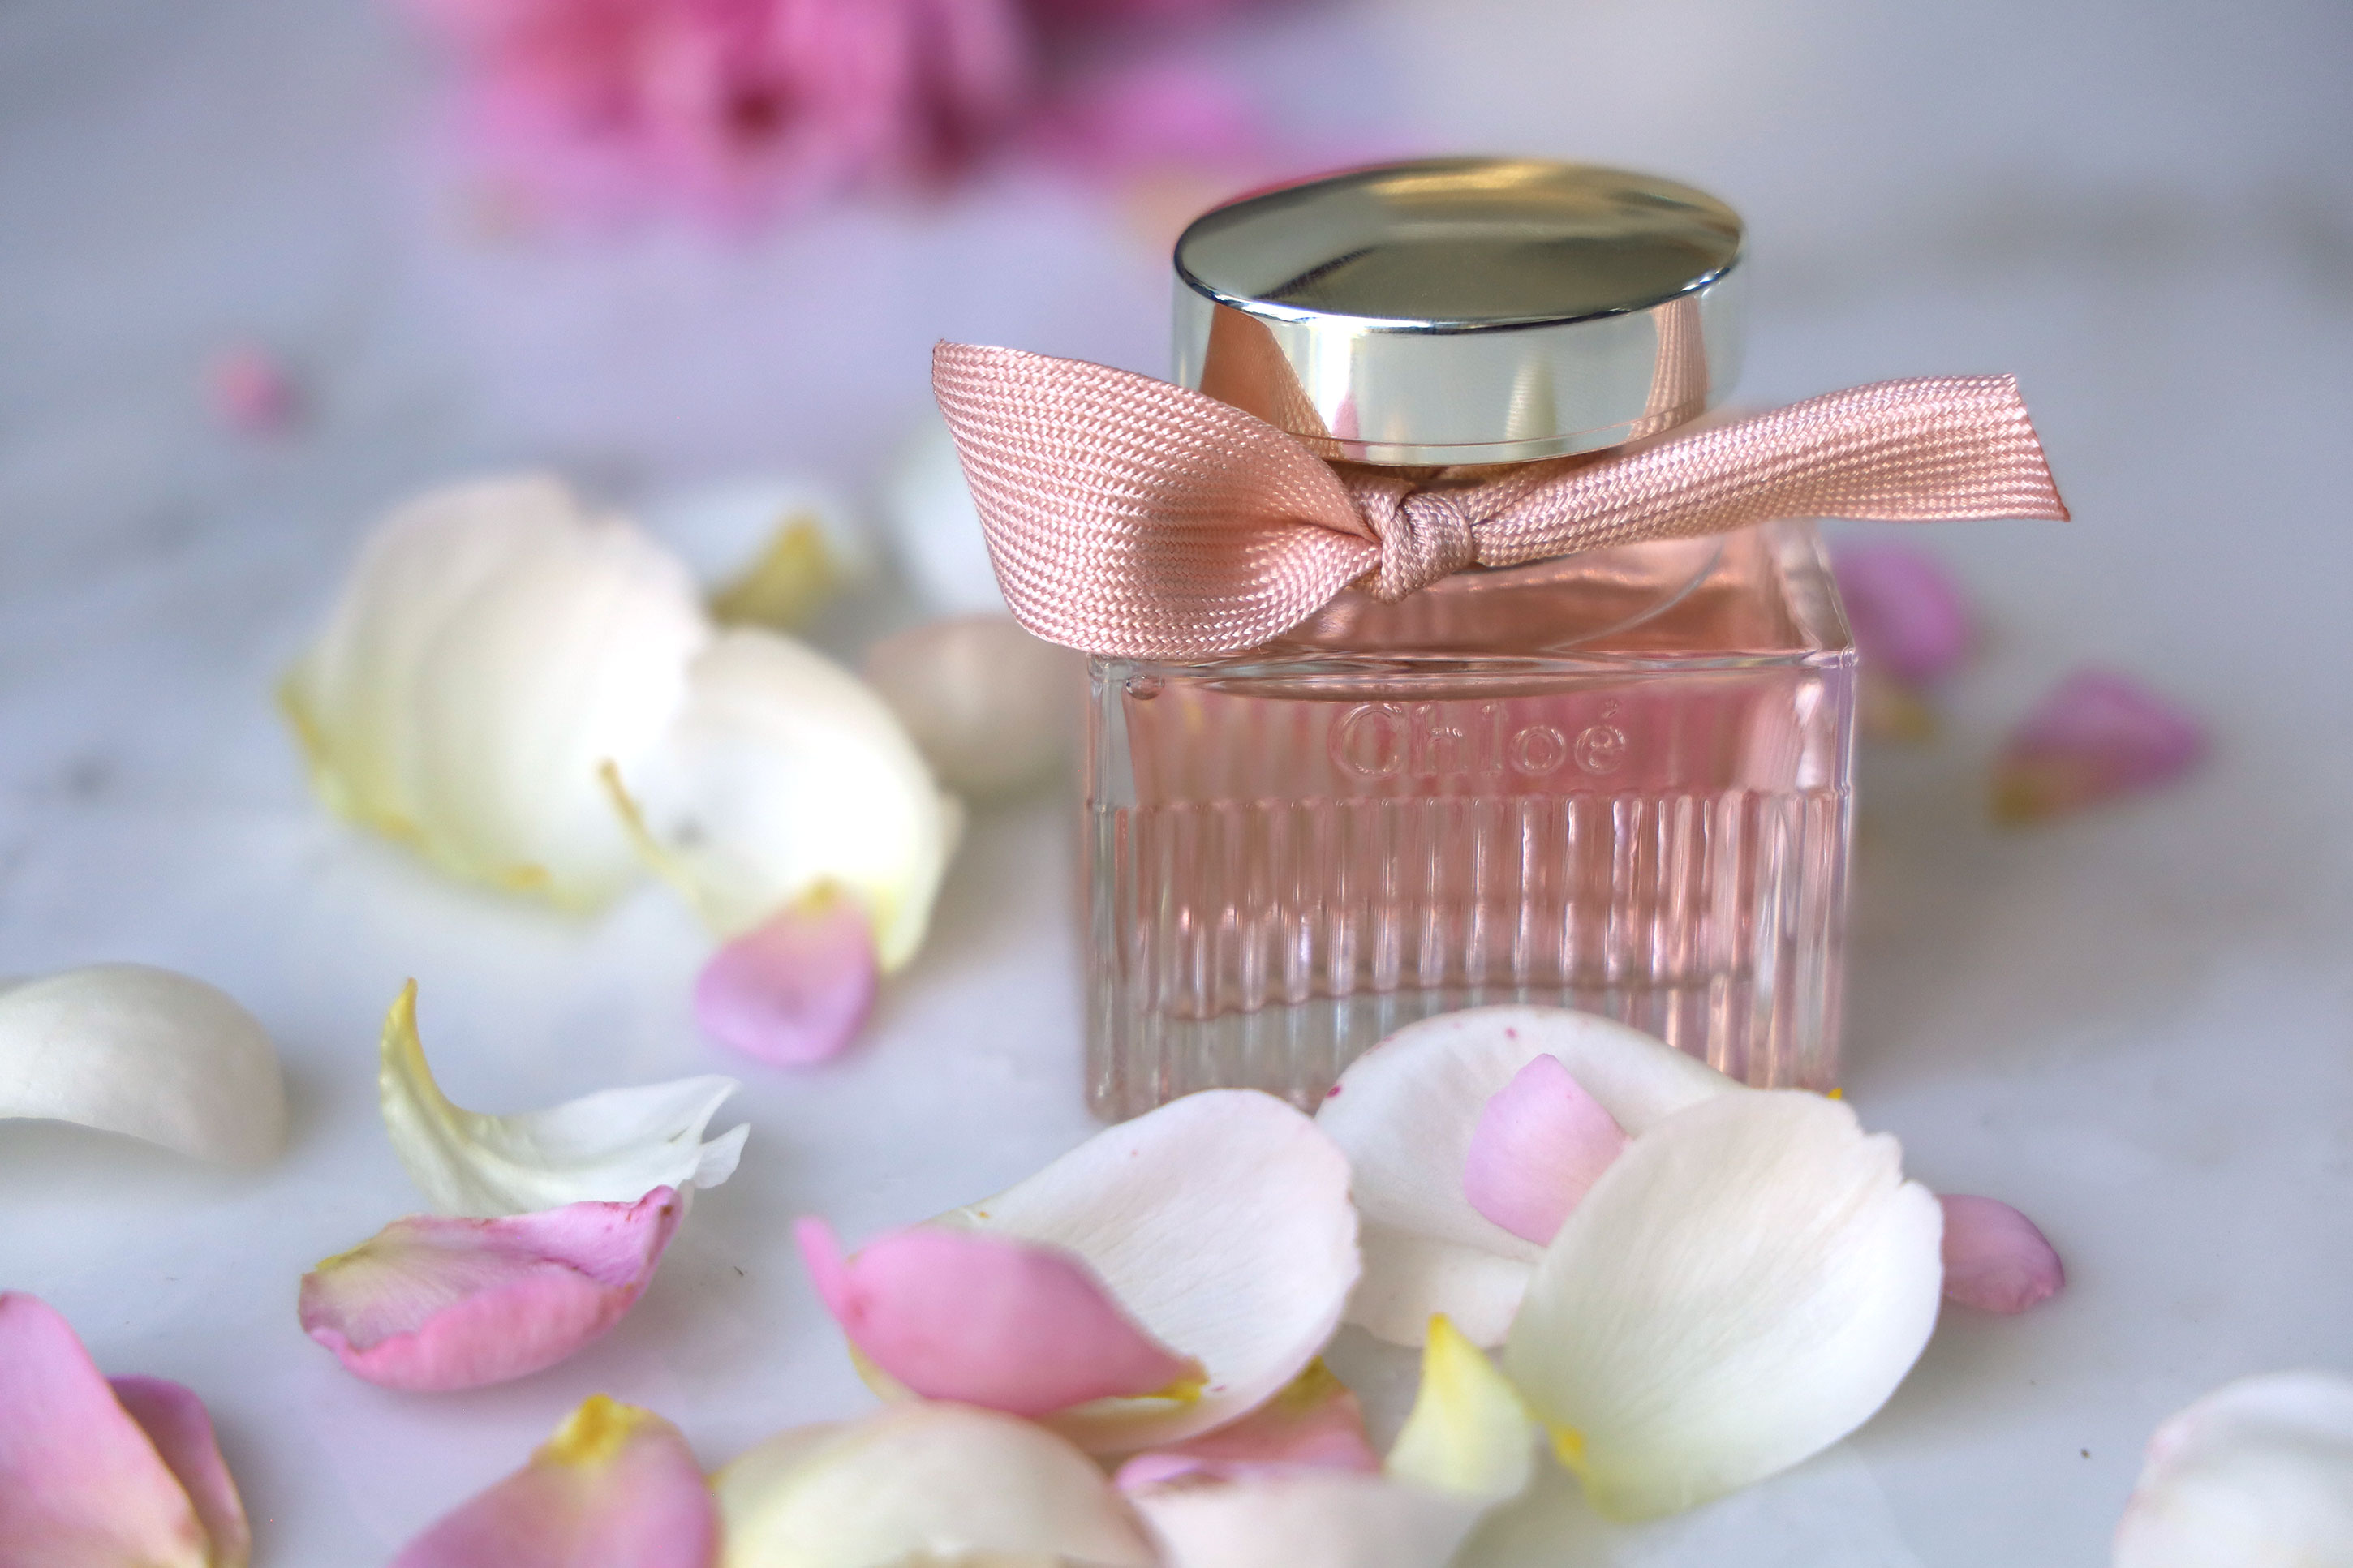 The New And Surprizing Chloé Leau Fragrance Reviews - 